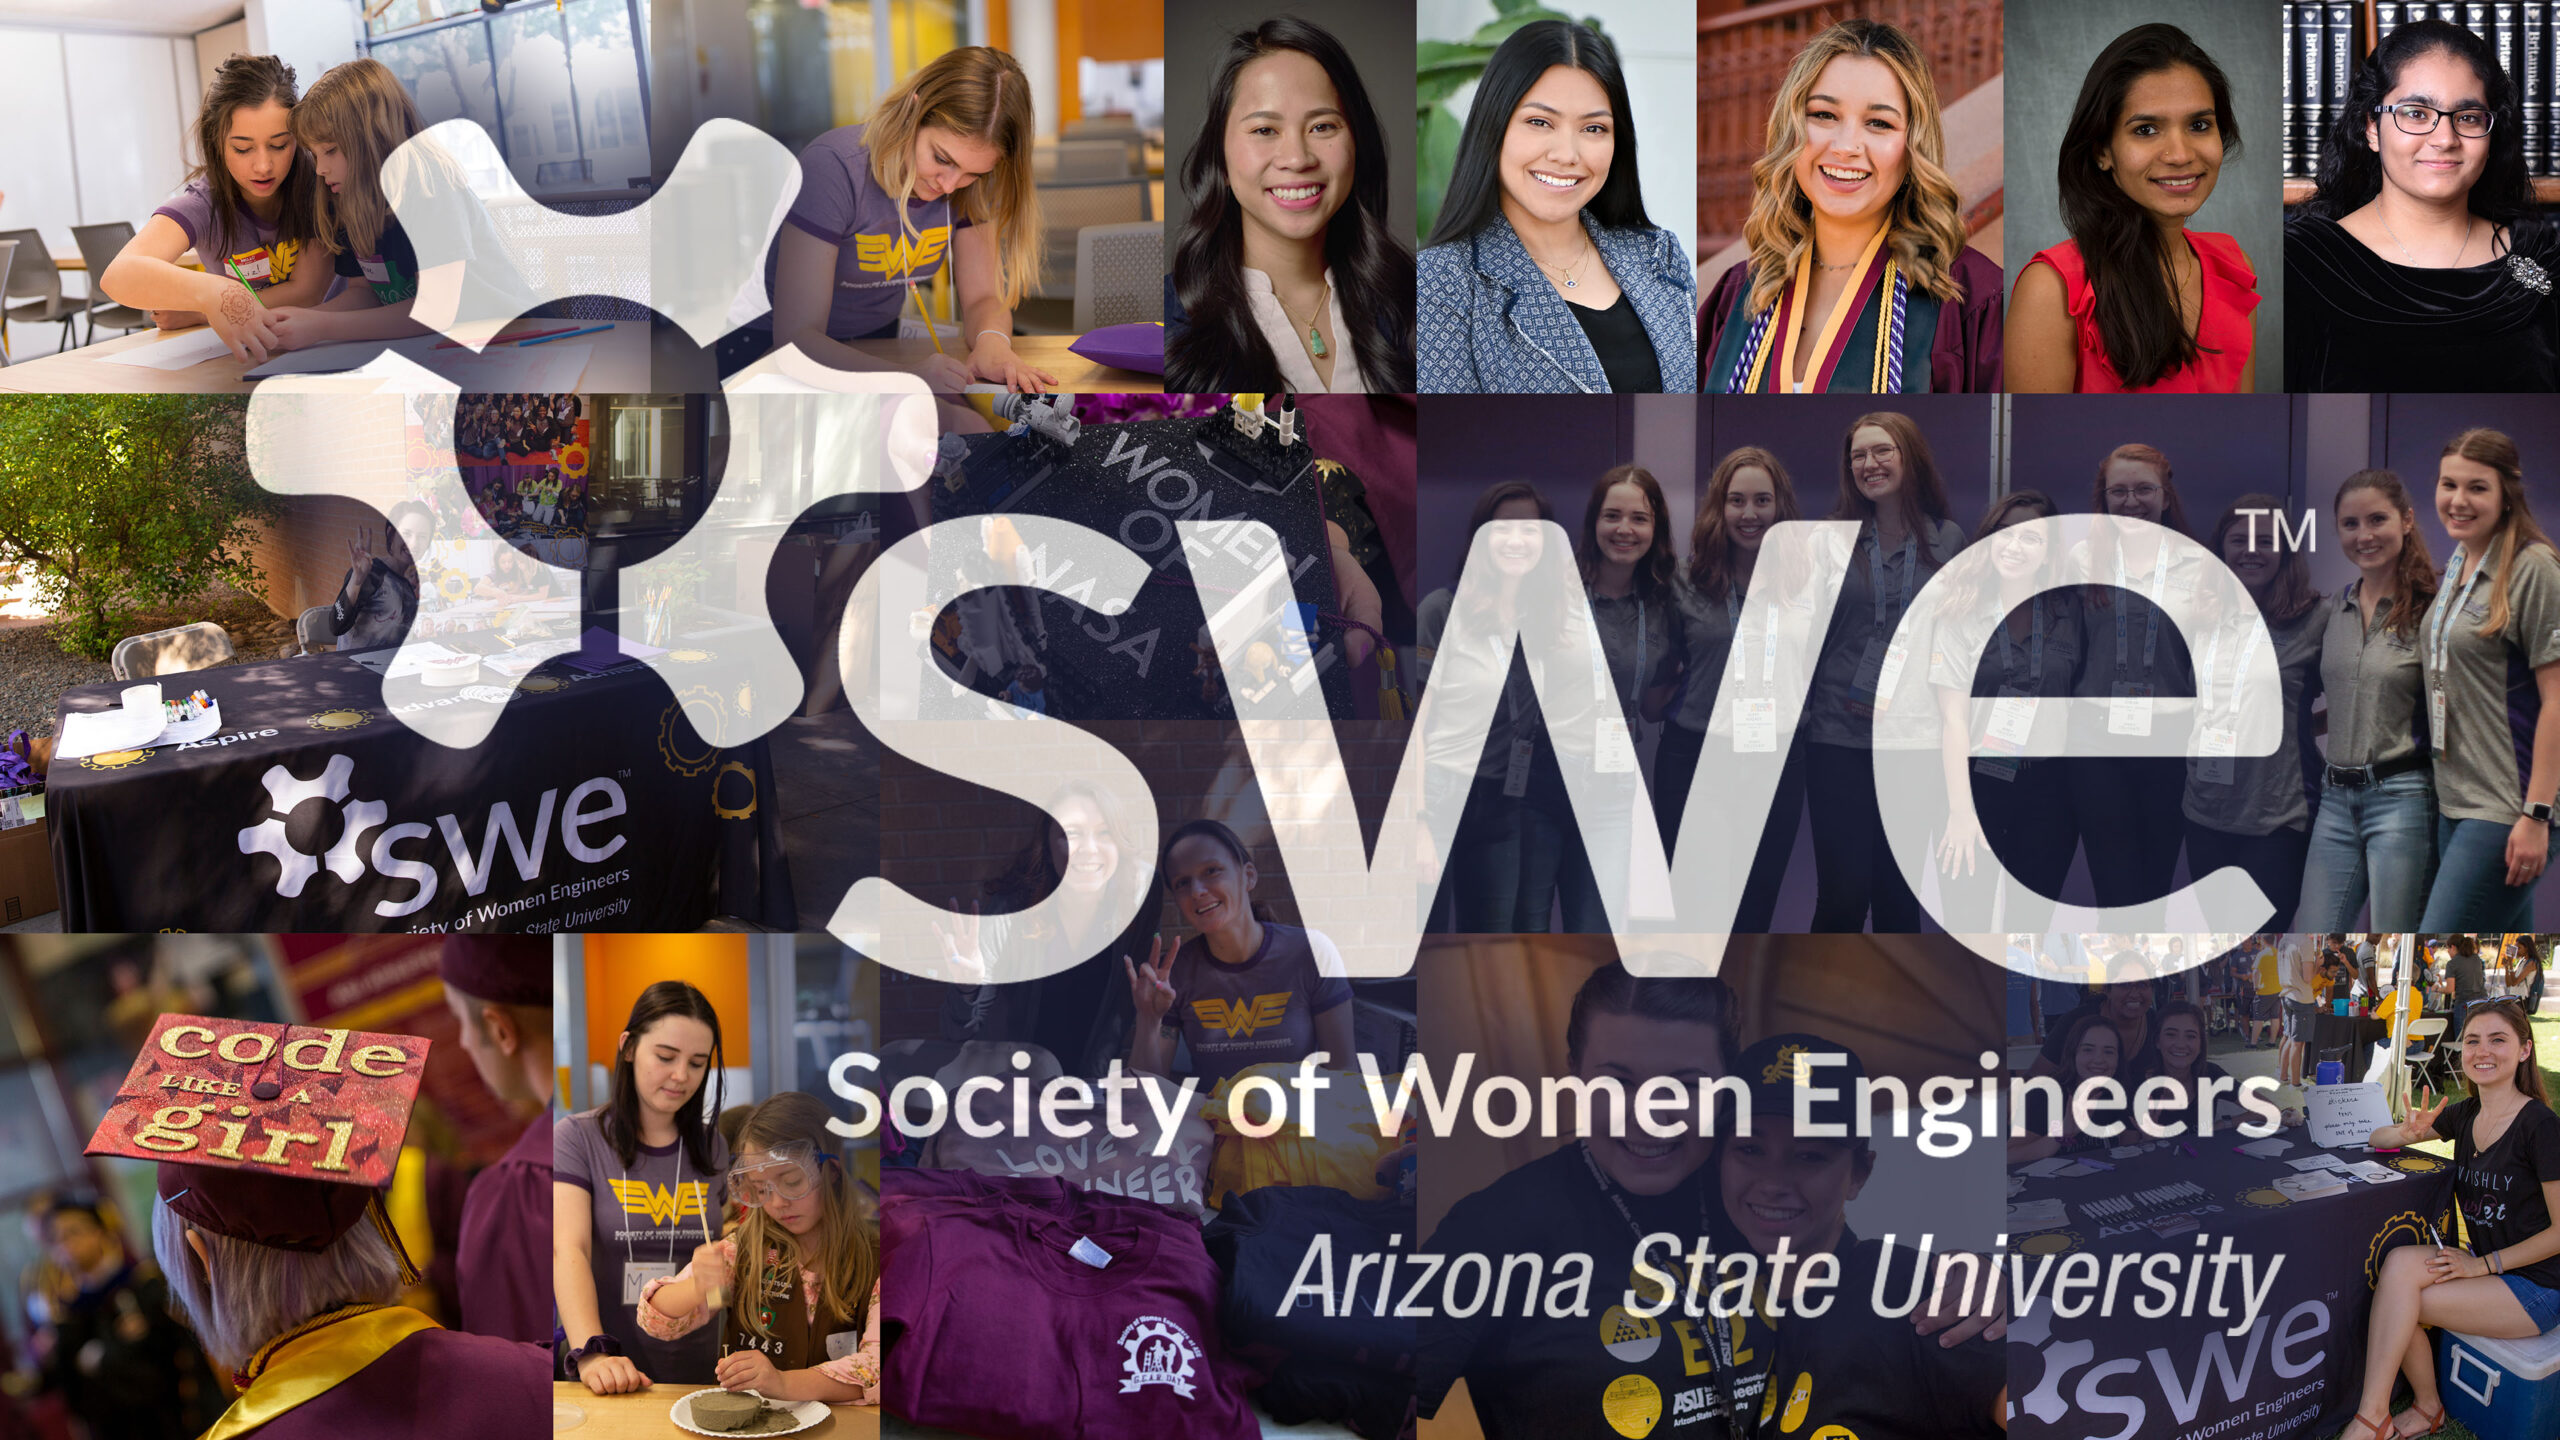 A graphic depicting students and activities from the Arizona State University section of the Society of Women Engineers.